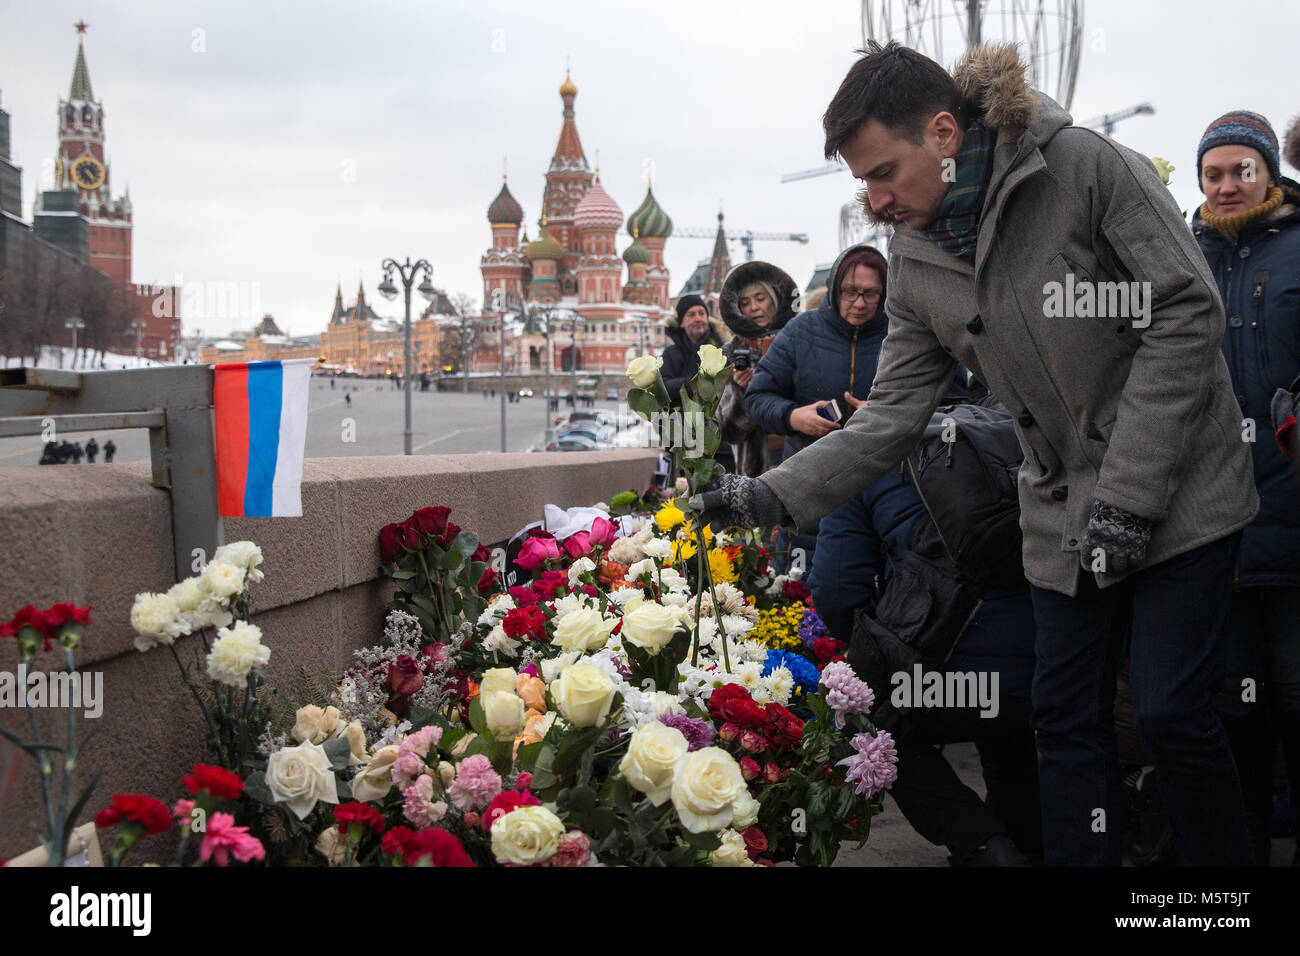 Moscow, Russia. 25th February 2018. People  lay flowers at place of the assassination of Russian opposition leader Boris Nemtsov in  on the eve of the 3rd anniversary of his death. Boris Nemtsov was shot dead on Bolshoi Moskvoretsky Bridge in the evening of February 27, 2015. Credit: Victor Vytolskiy/Alamy Live News Stock Photo